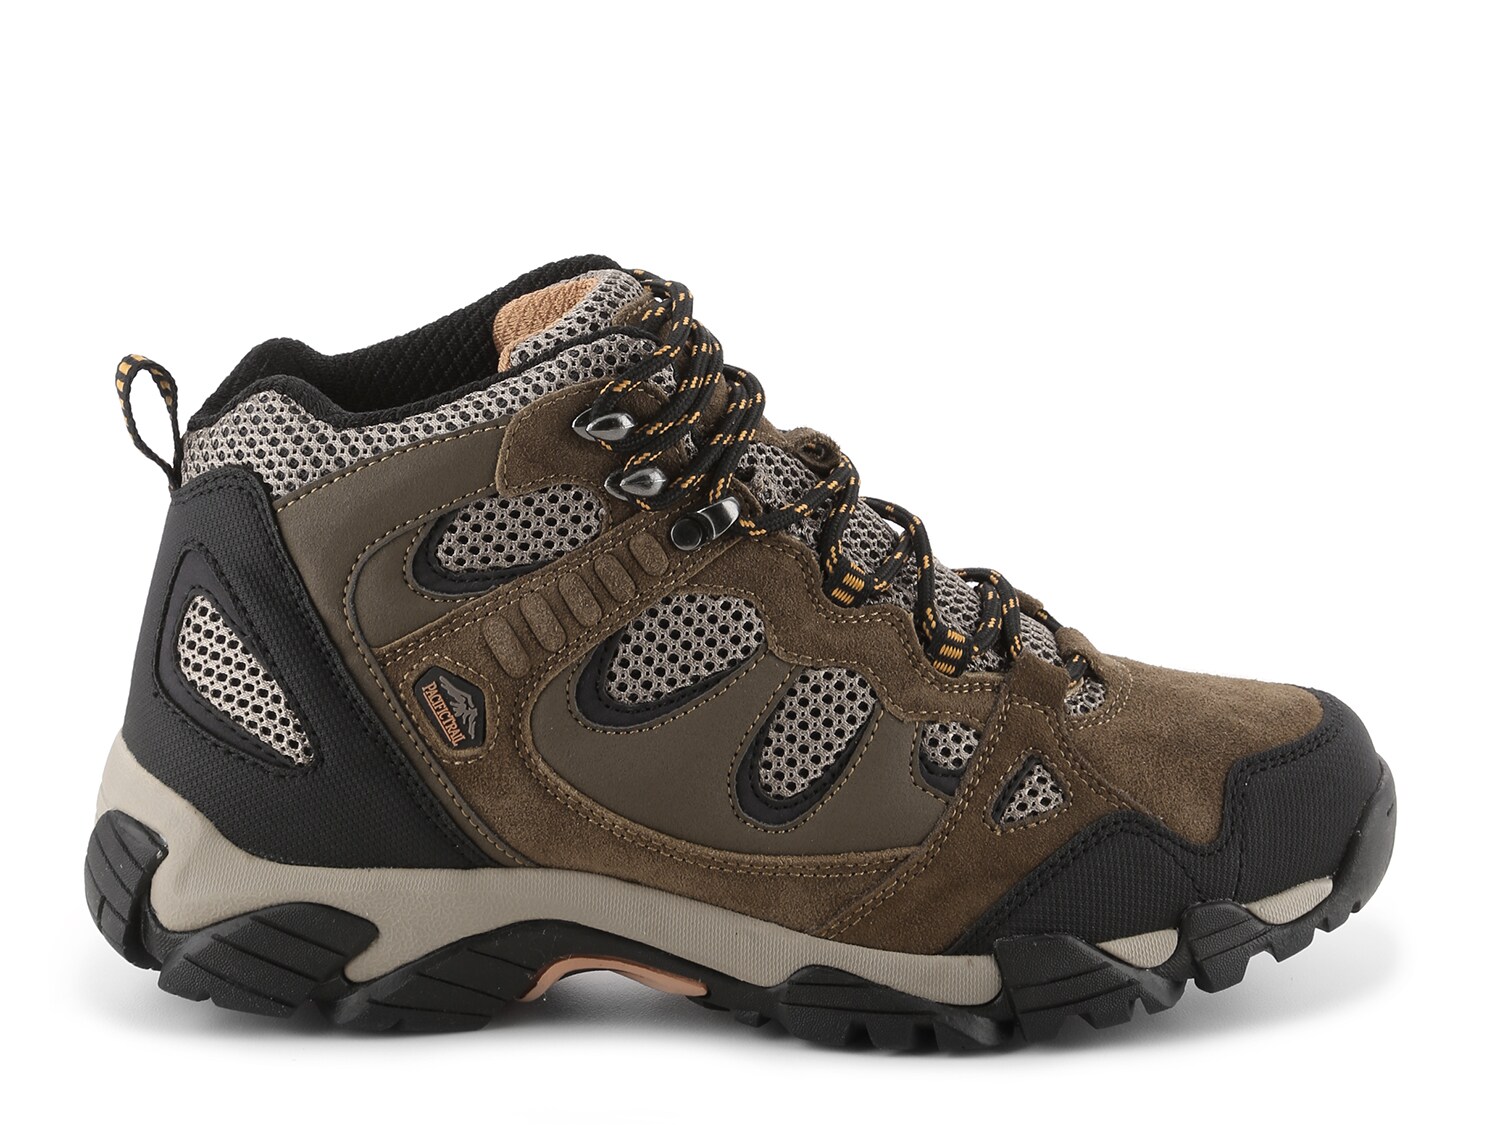 Pacific Trail Sequoia Hiking Boot - Men's | DSW